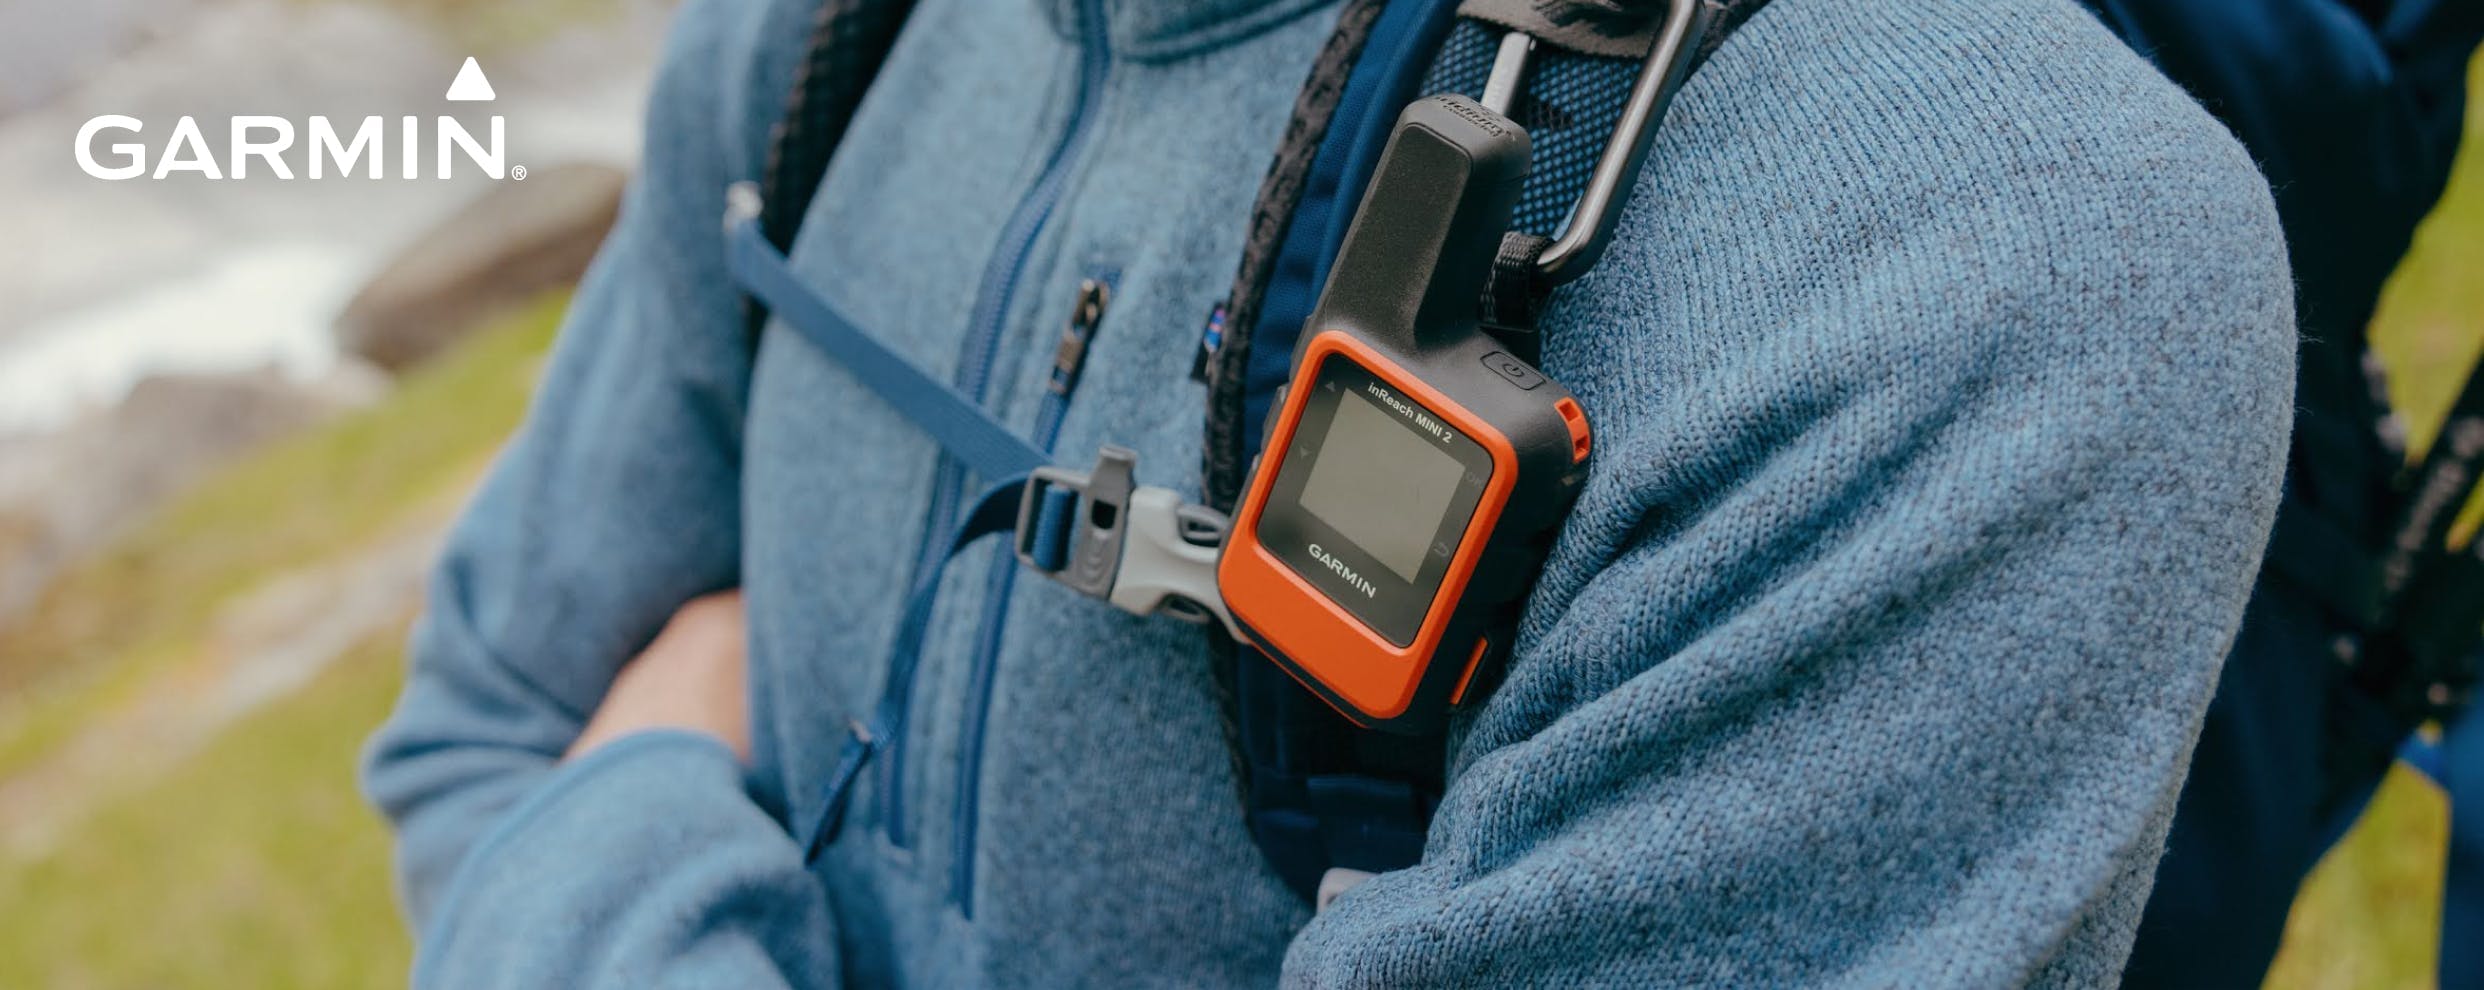 Top-tier deals on the Fenix 7, Epix and $70 off inReach. Select styles, ends June 18.